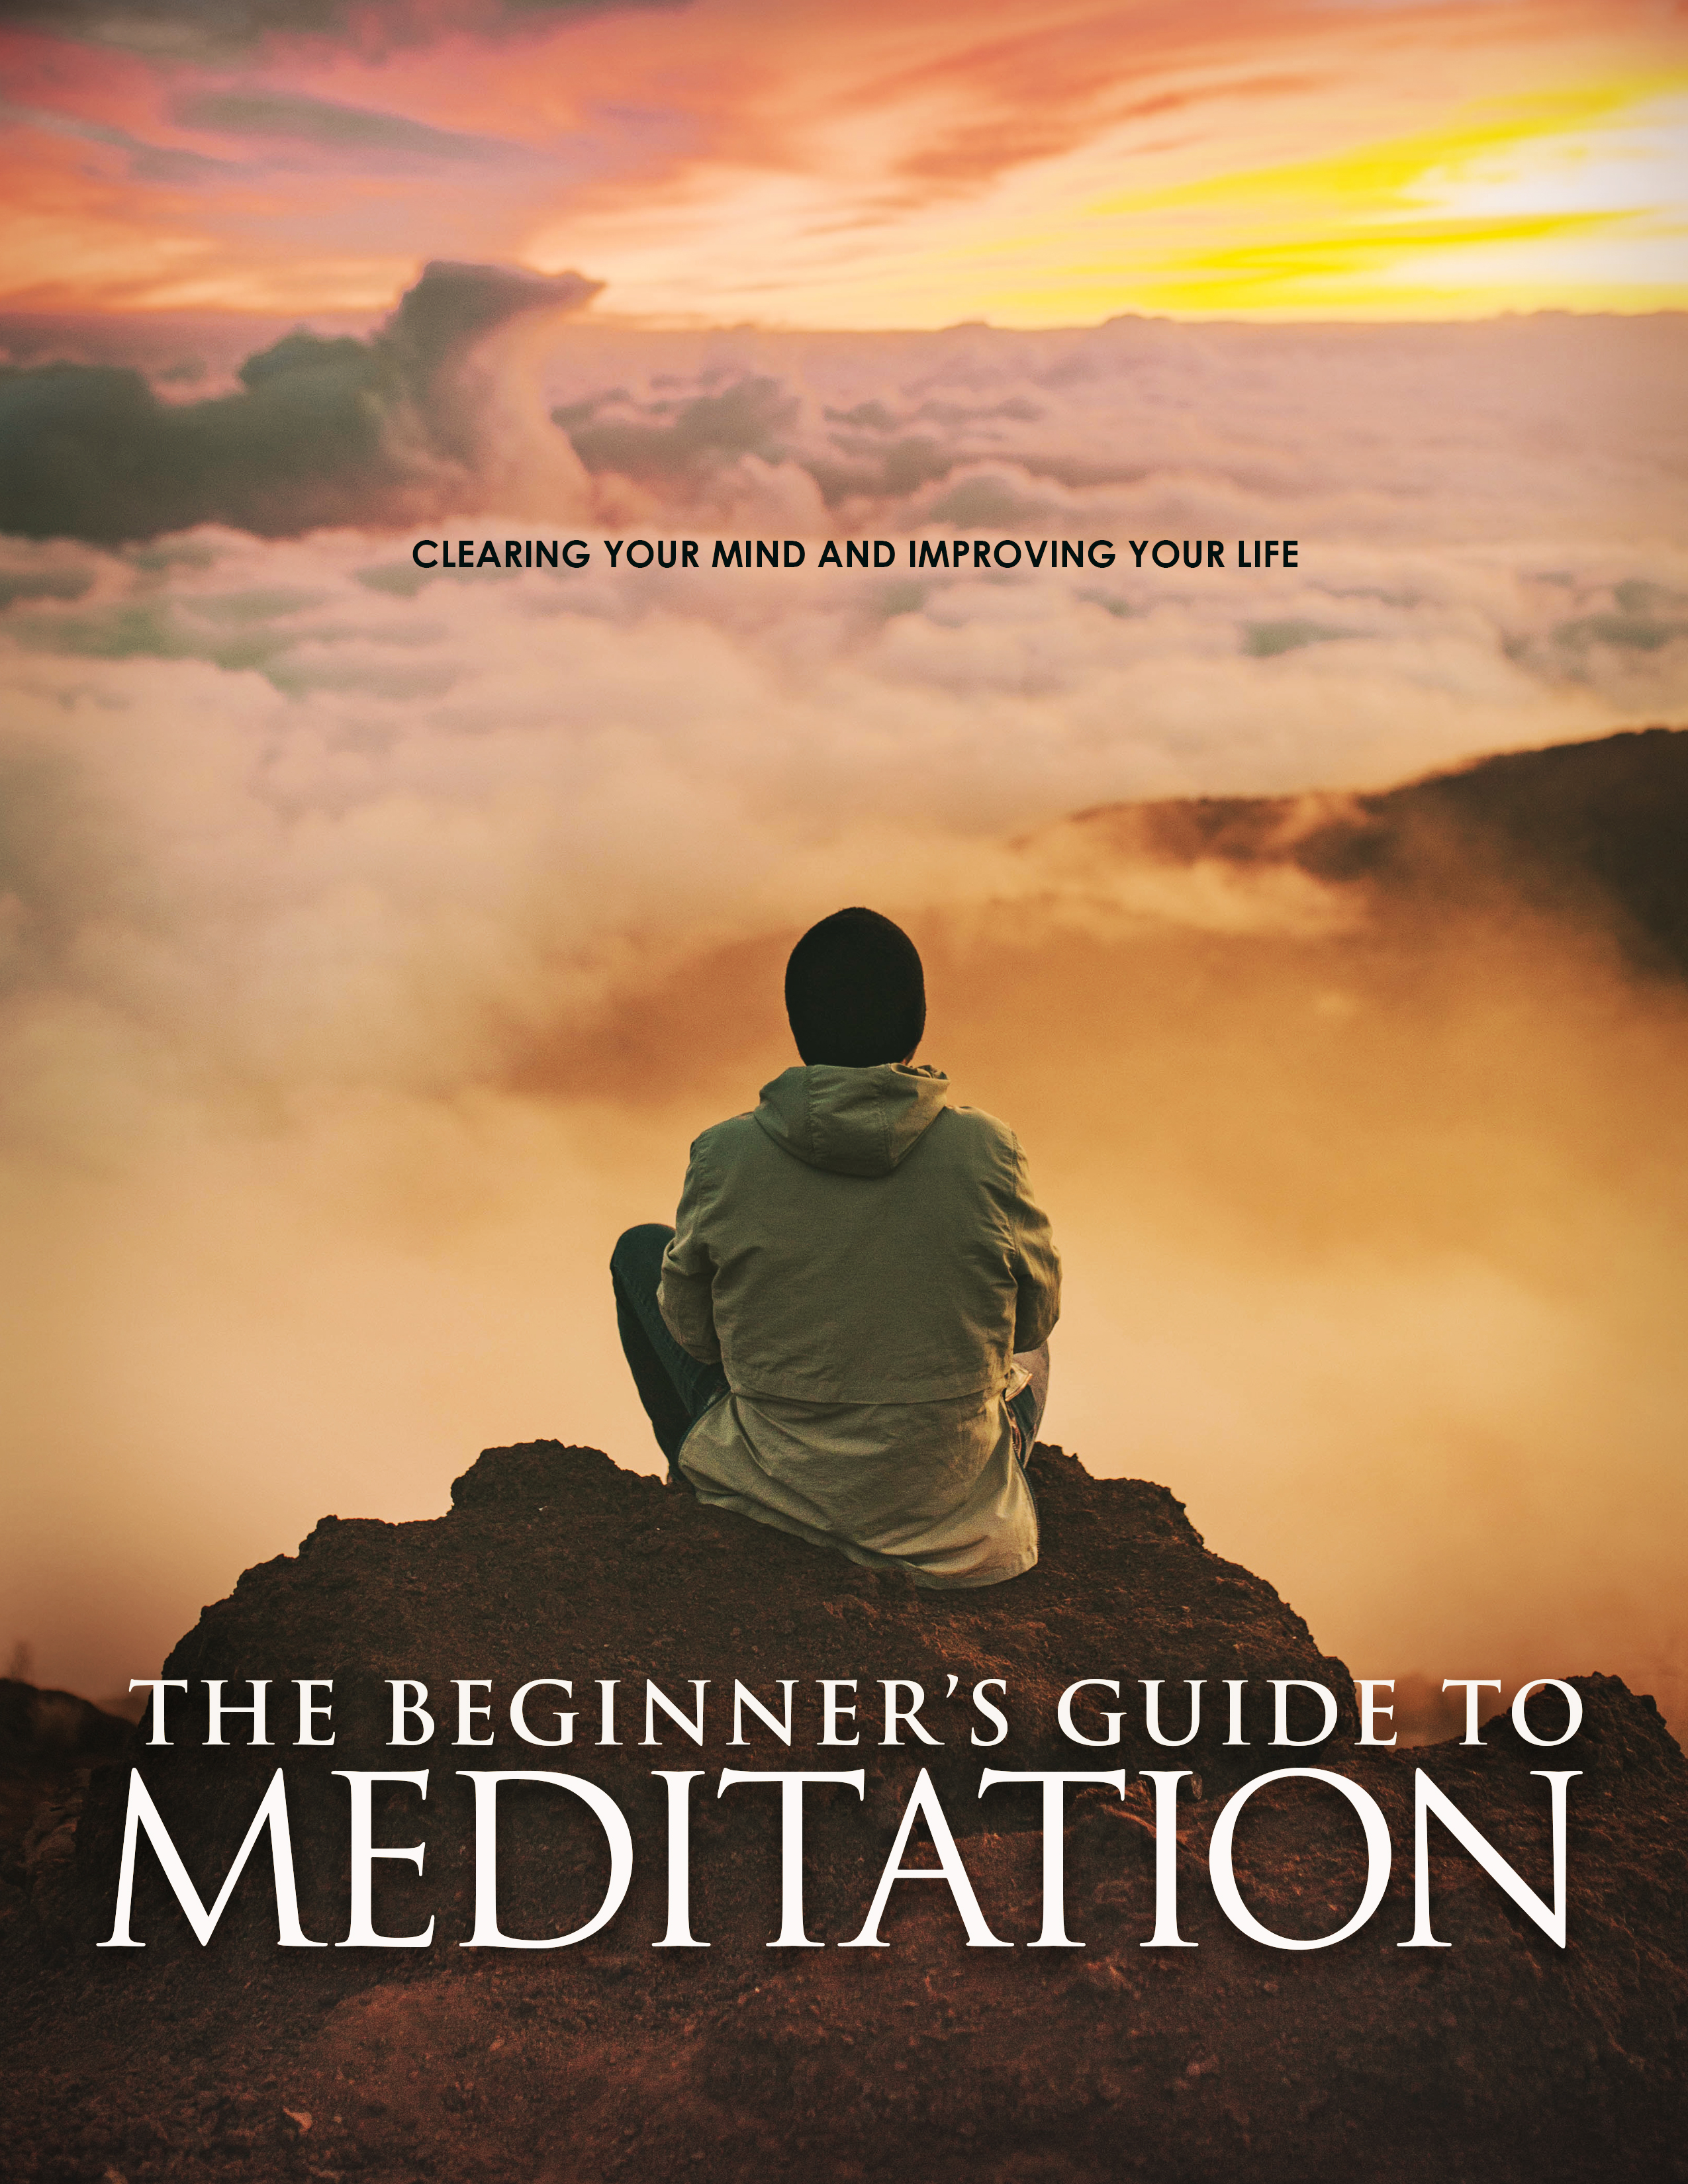 Guide To Meditation